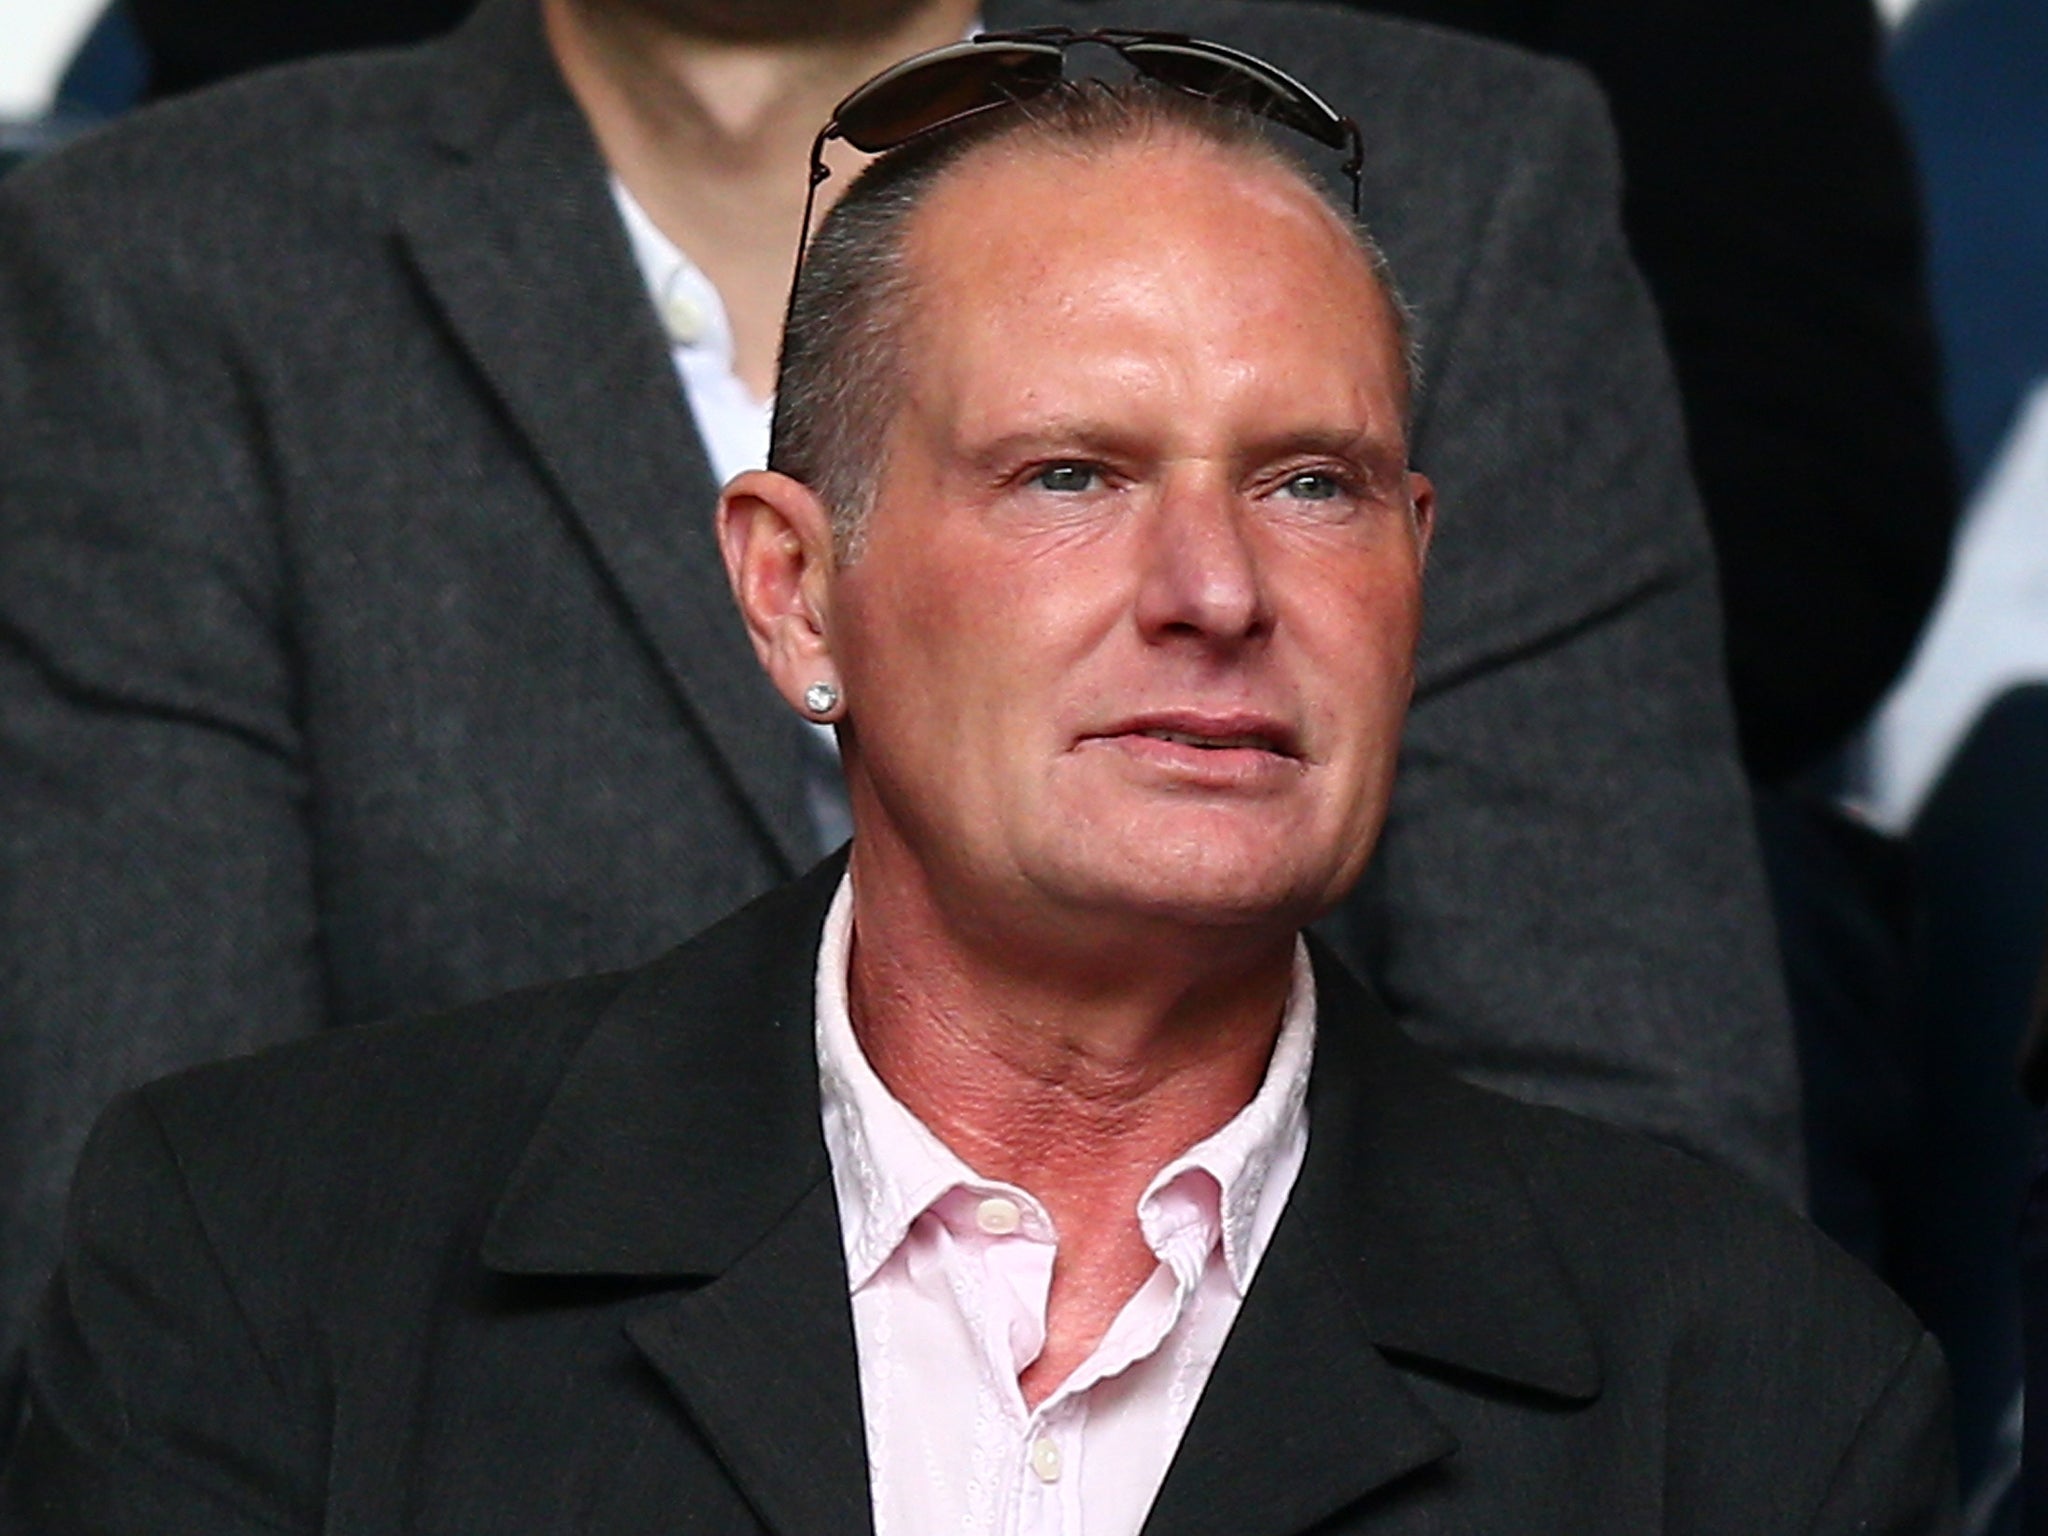 Gascoigne pictured at a football match in April of this year